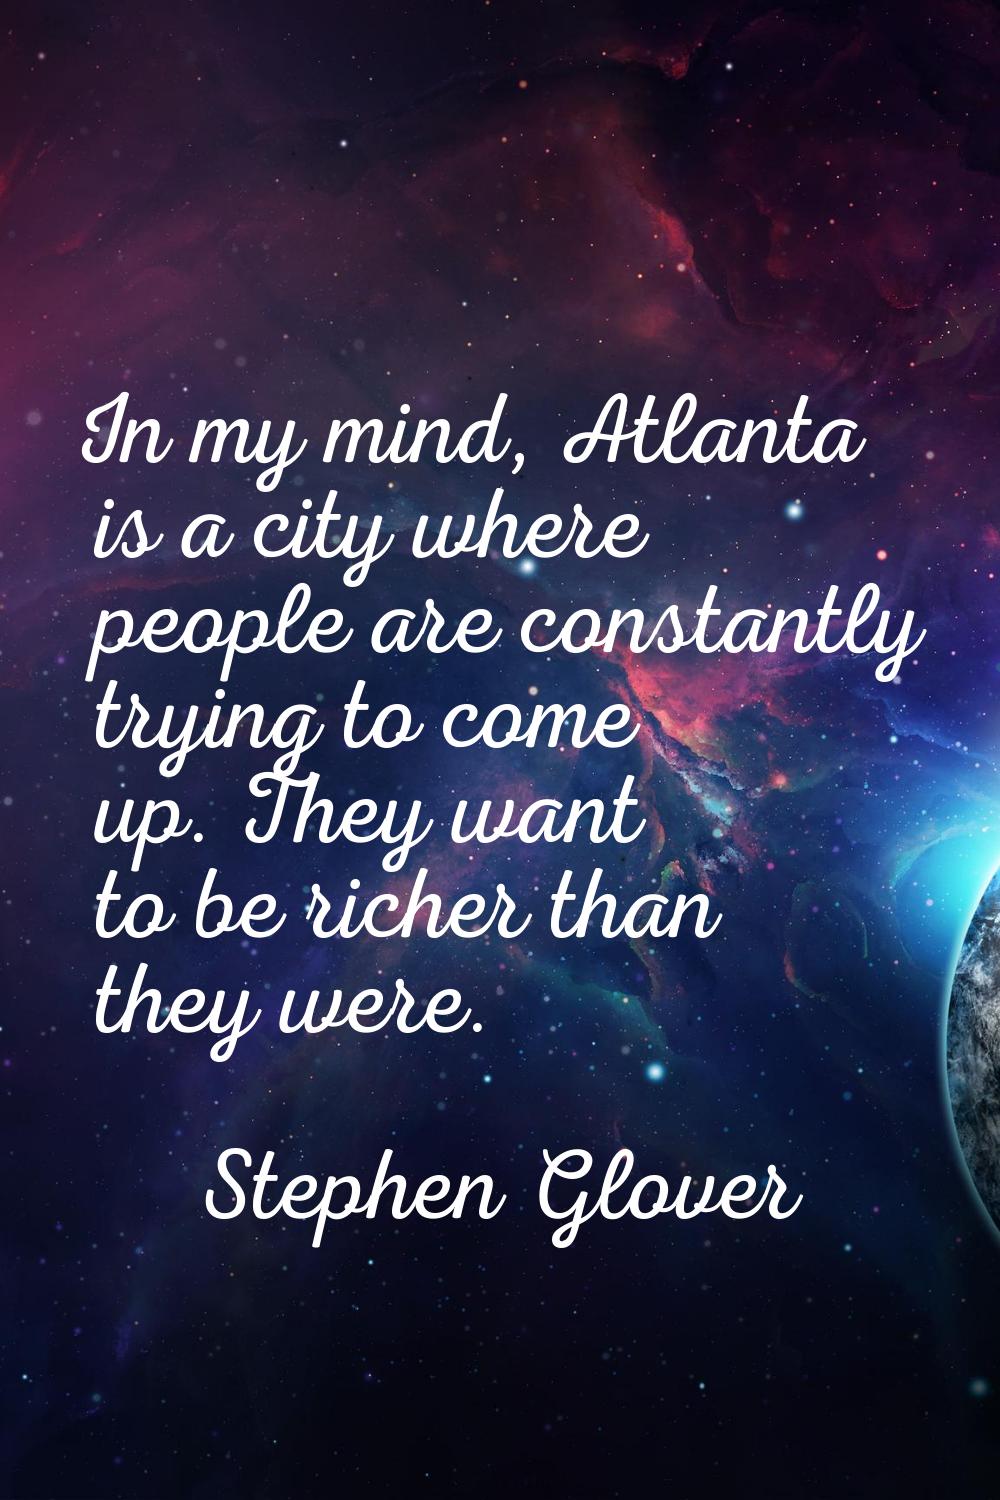 In my mind, Atlanta is a city where people are constantly trying to come up. They want to be richer